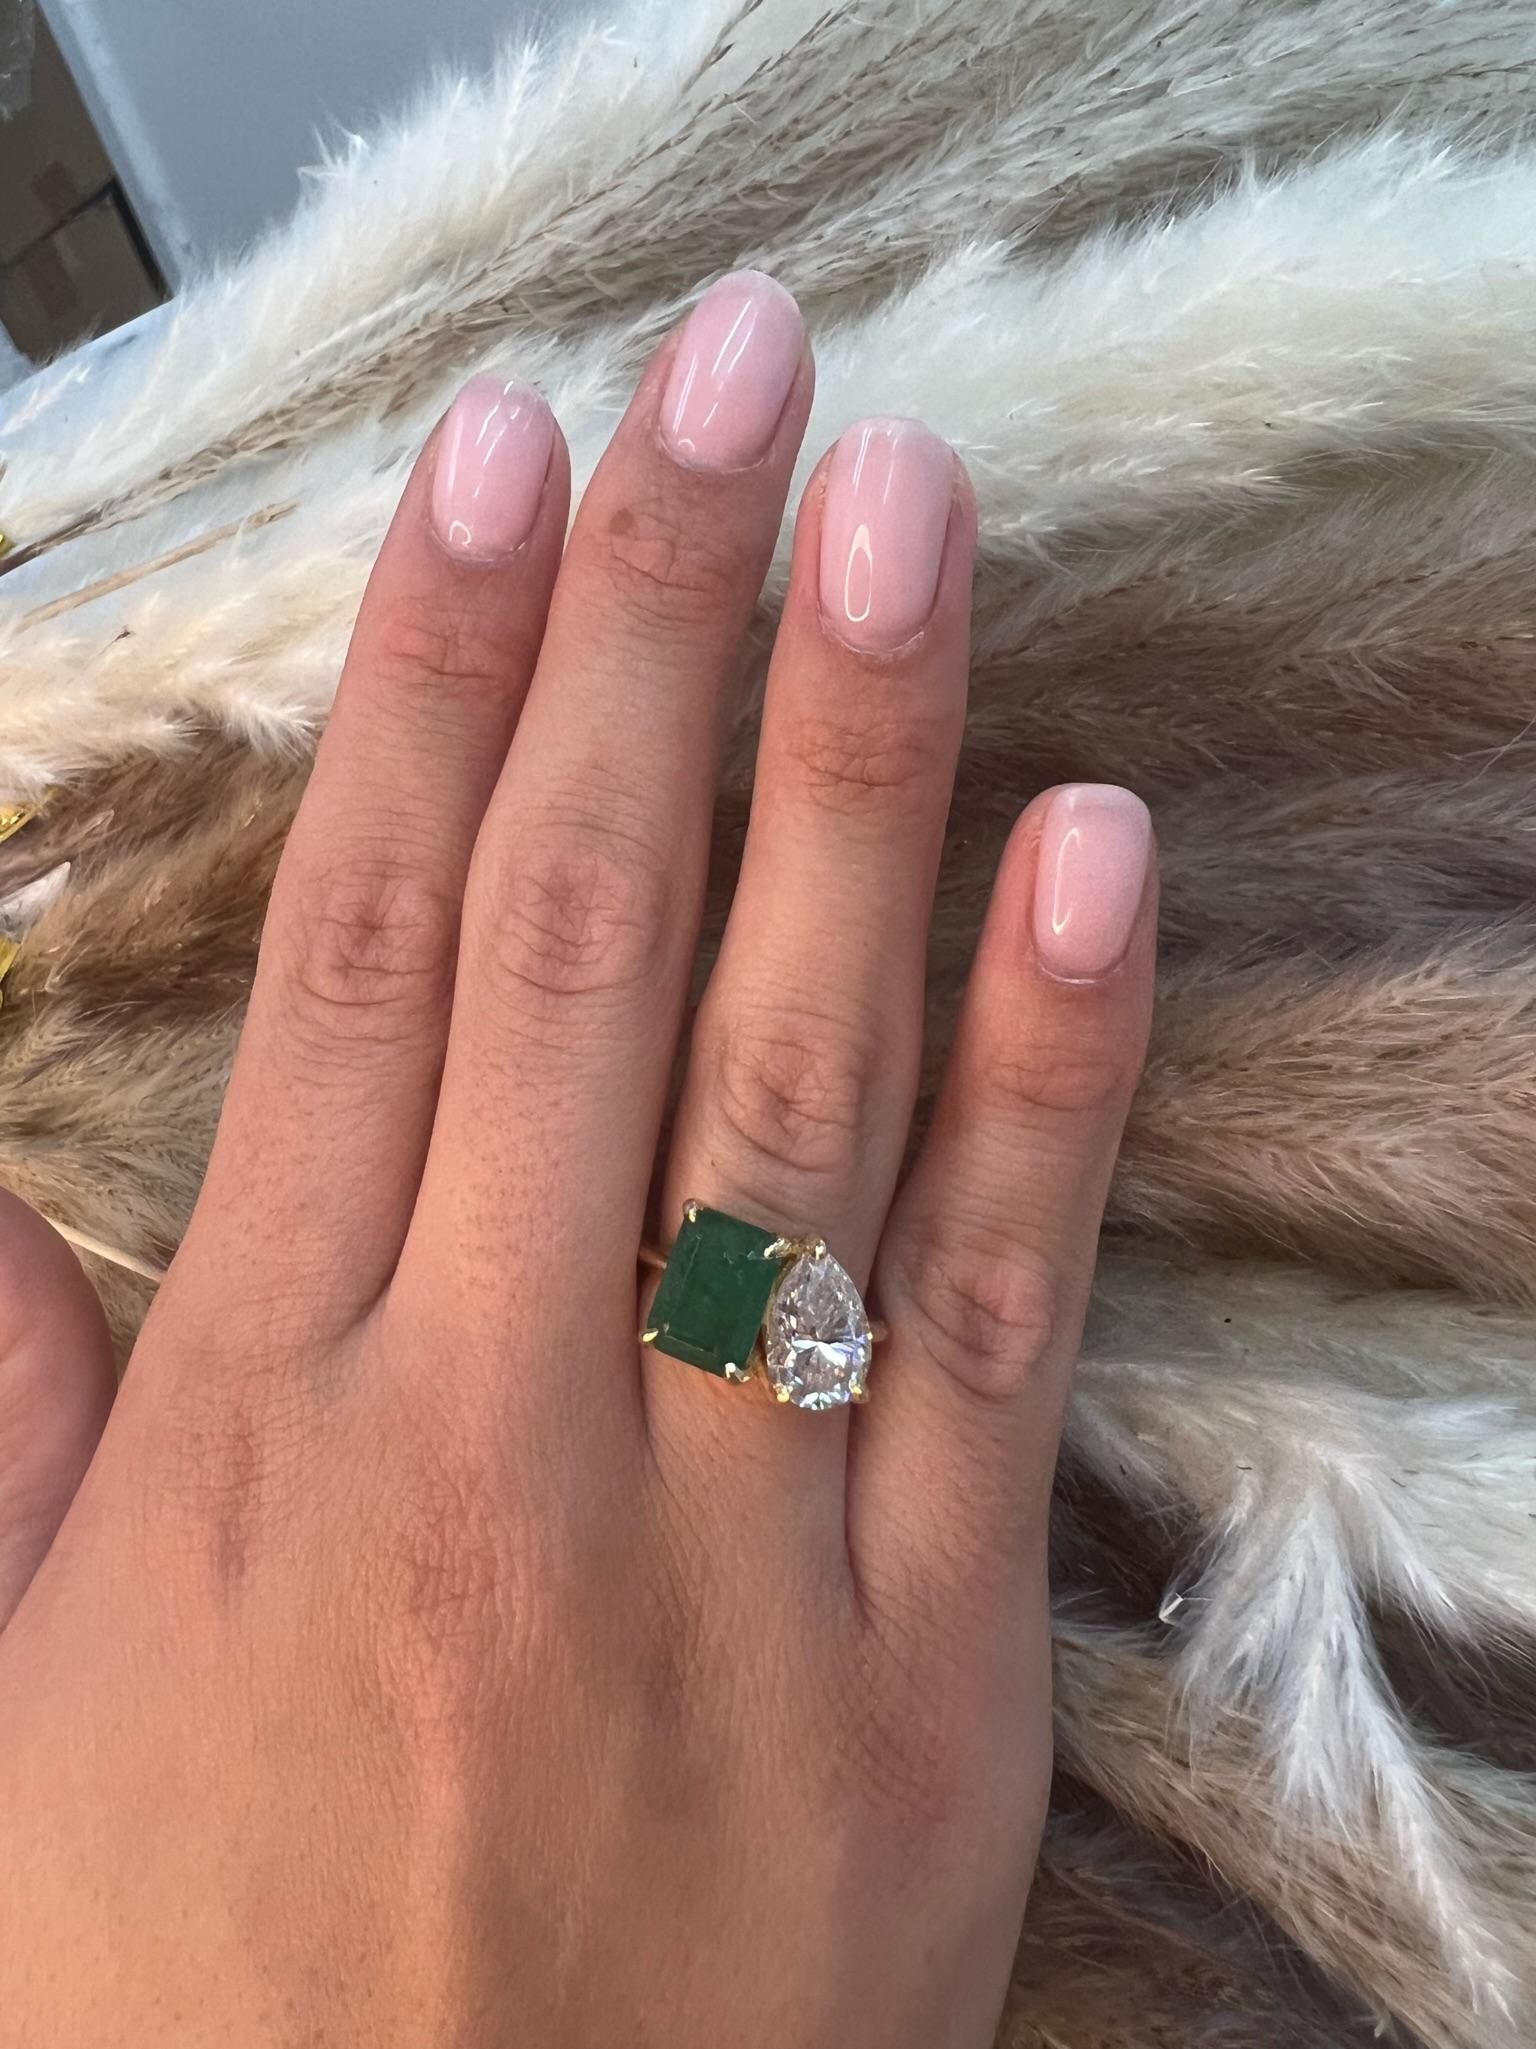 This ring is a stunning Toi Et Moi Engagement Ring that features a Green Emerald Cut Emerald and a brilliant Pear Shape Diamonds that will surely catch anyone's attention. Set in a sleek and durable 14K Yellow Gold Band. Looking for the perfect gift